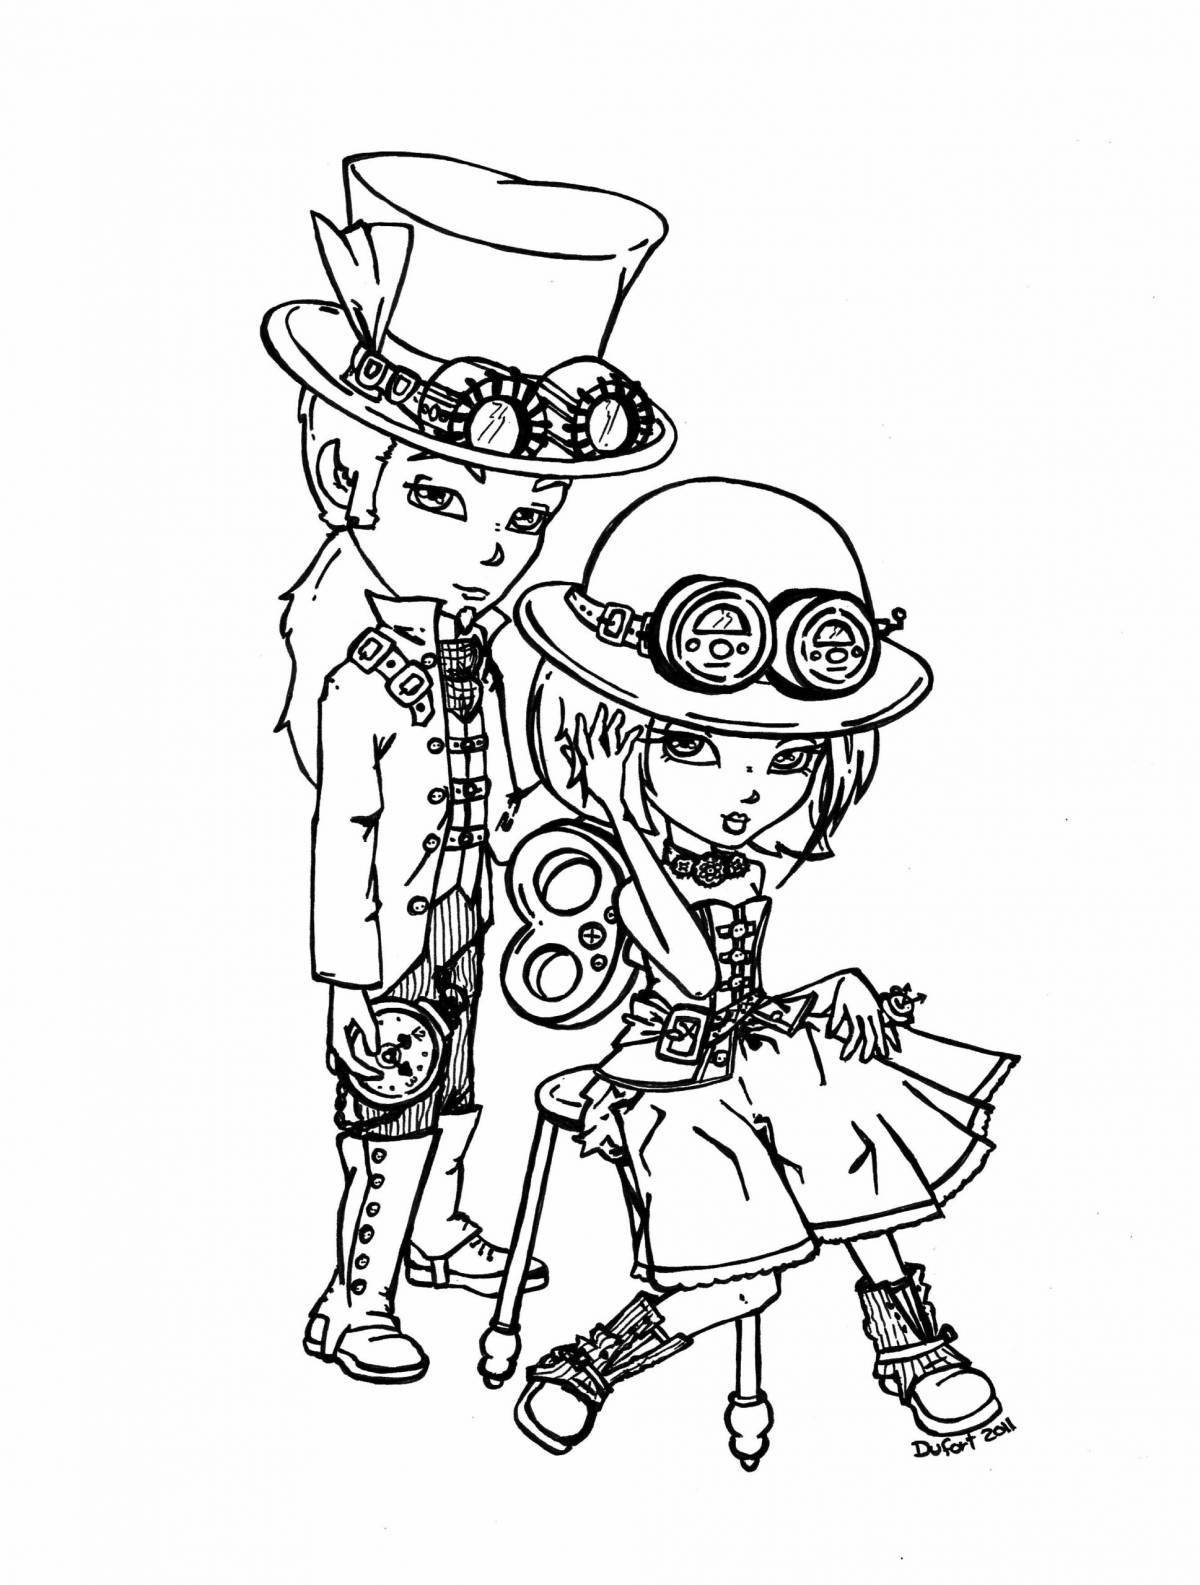 Steampunk inspirational coloring book